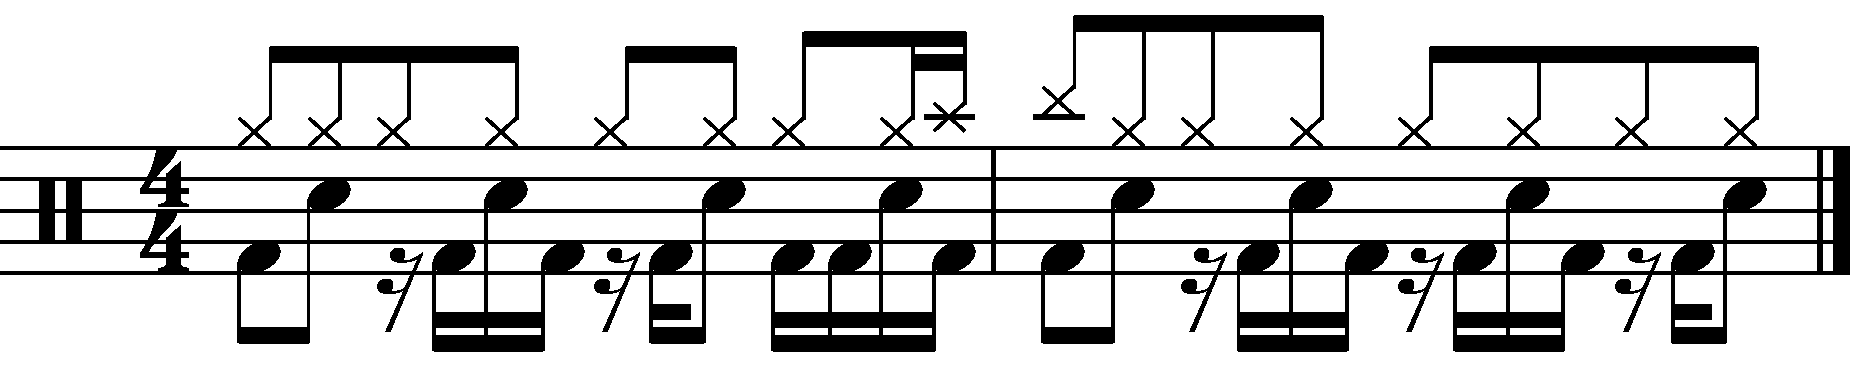 The concept applied to a double time groove